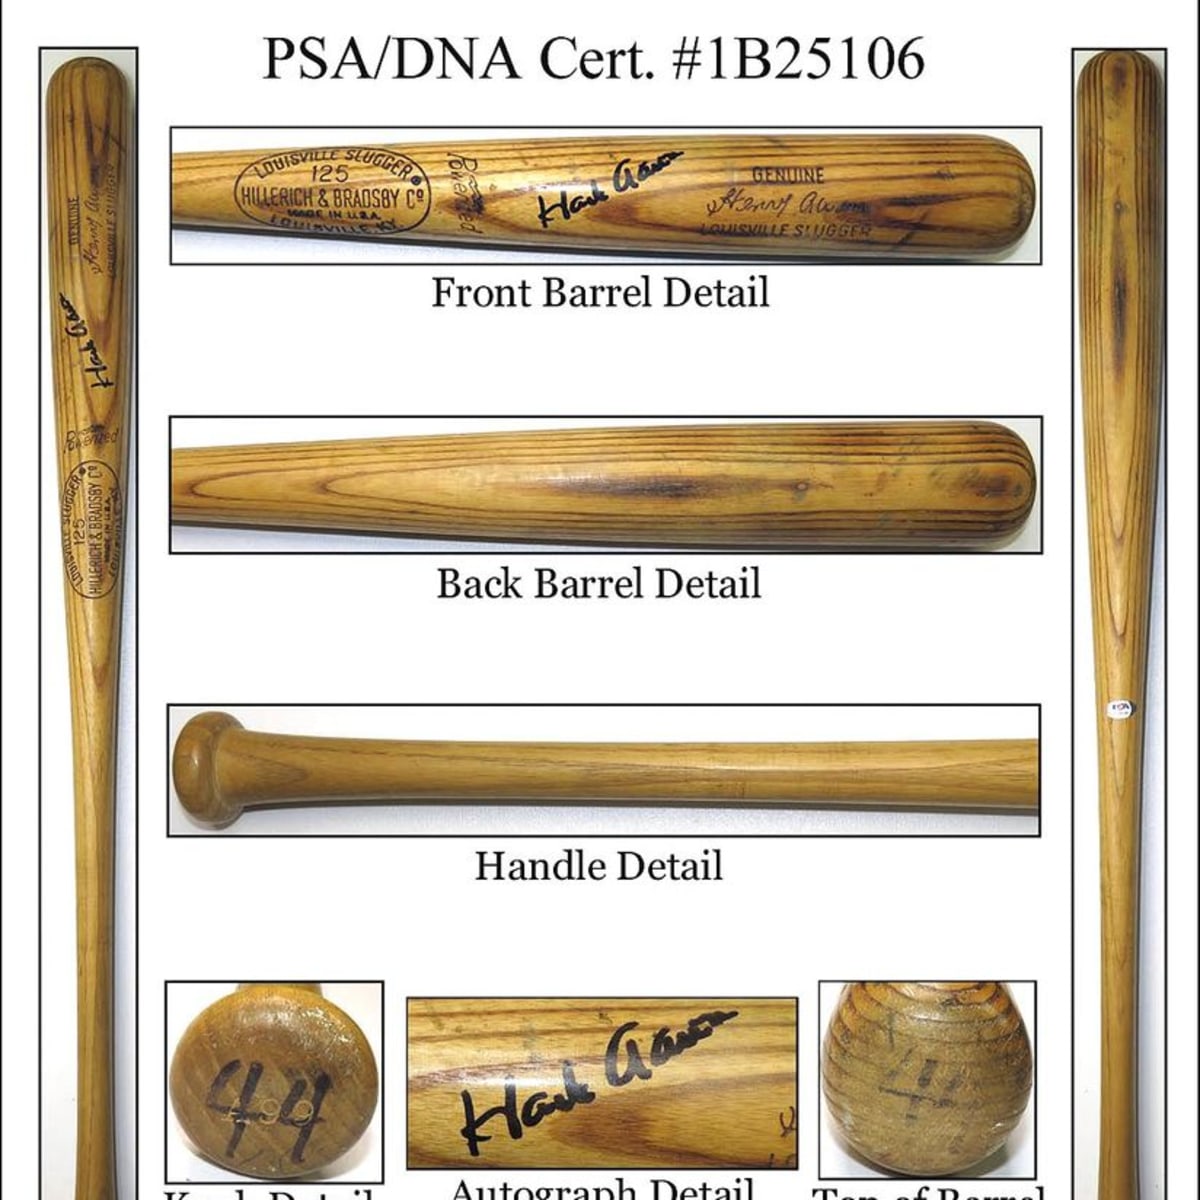 PSA launching pop reports for game-used bats - Sports Collectors Digest